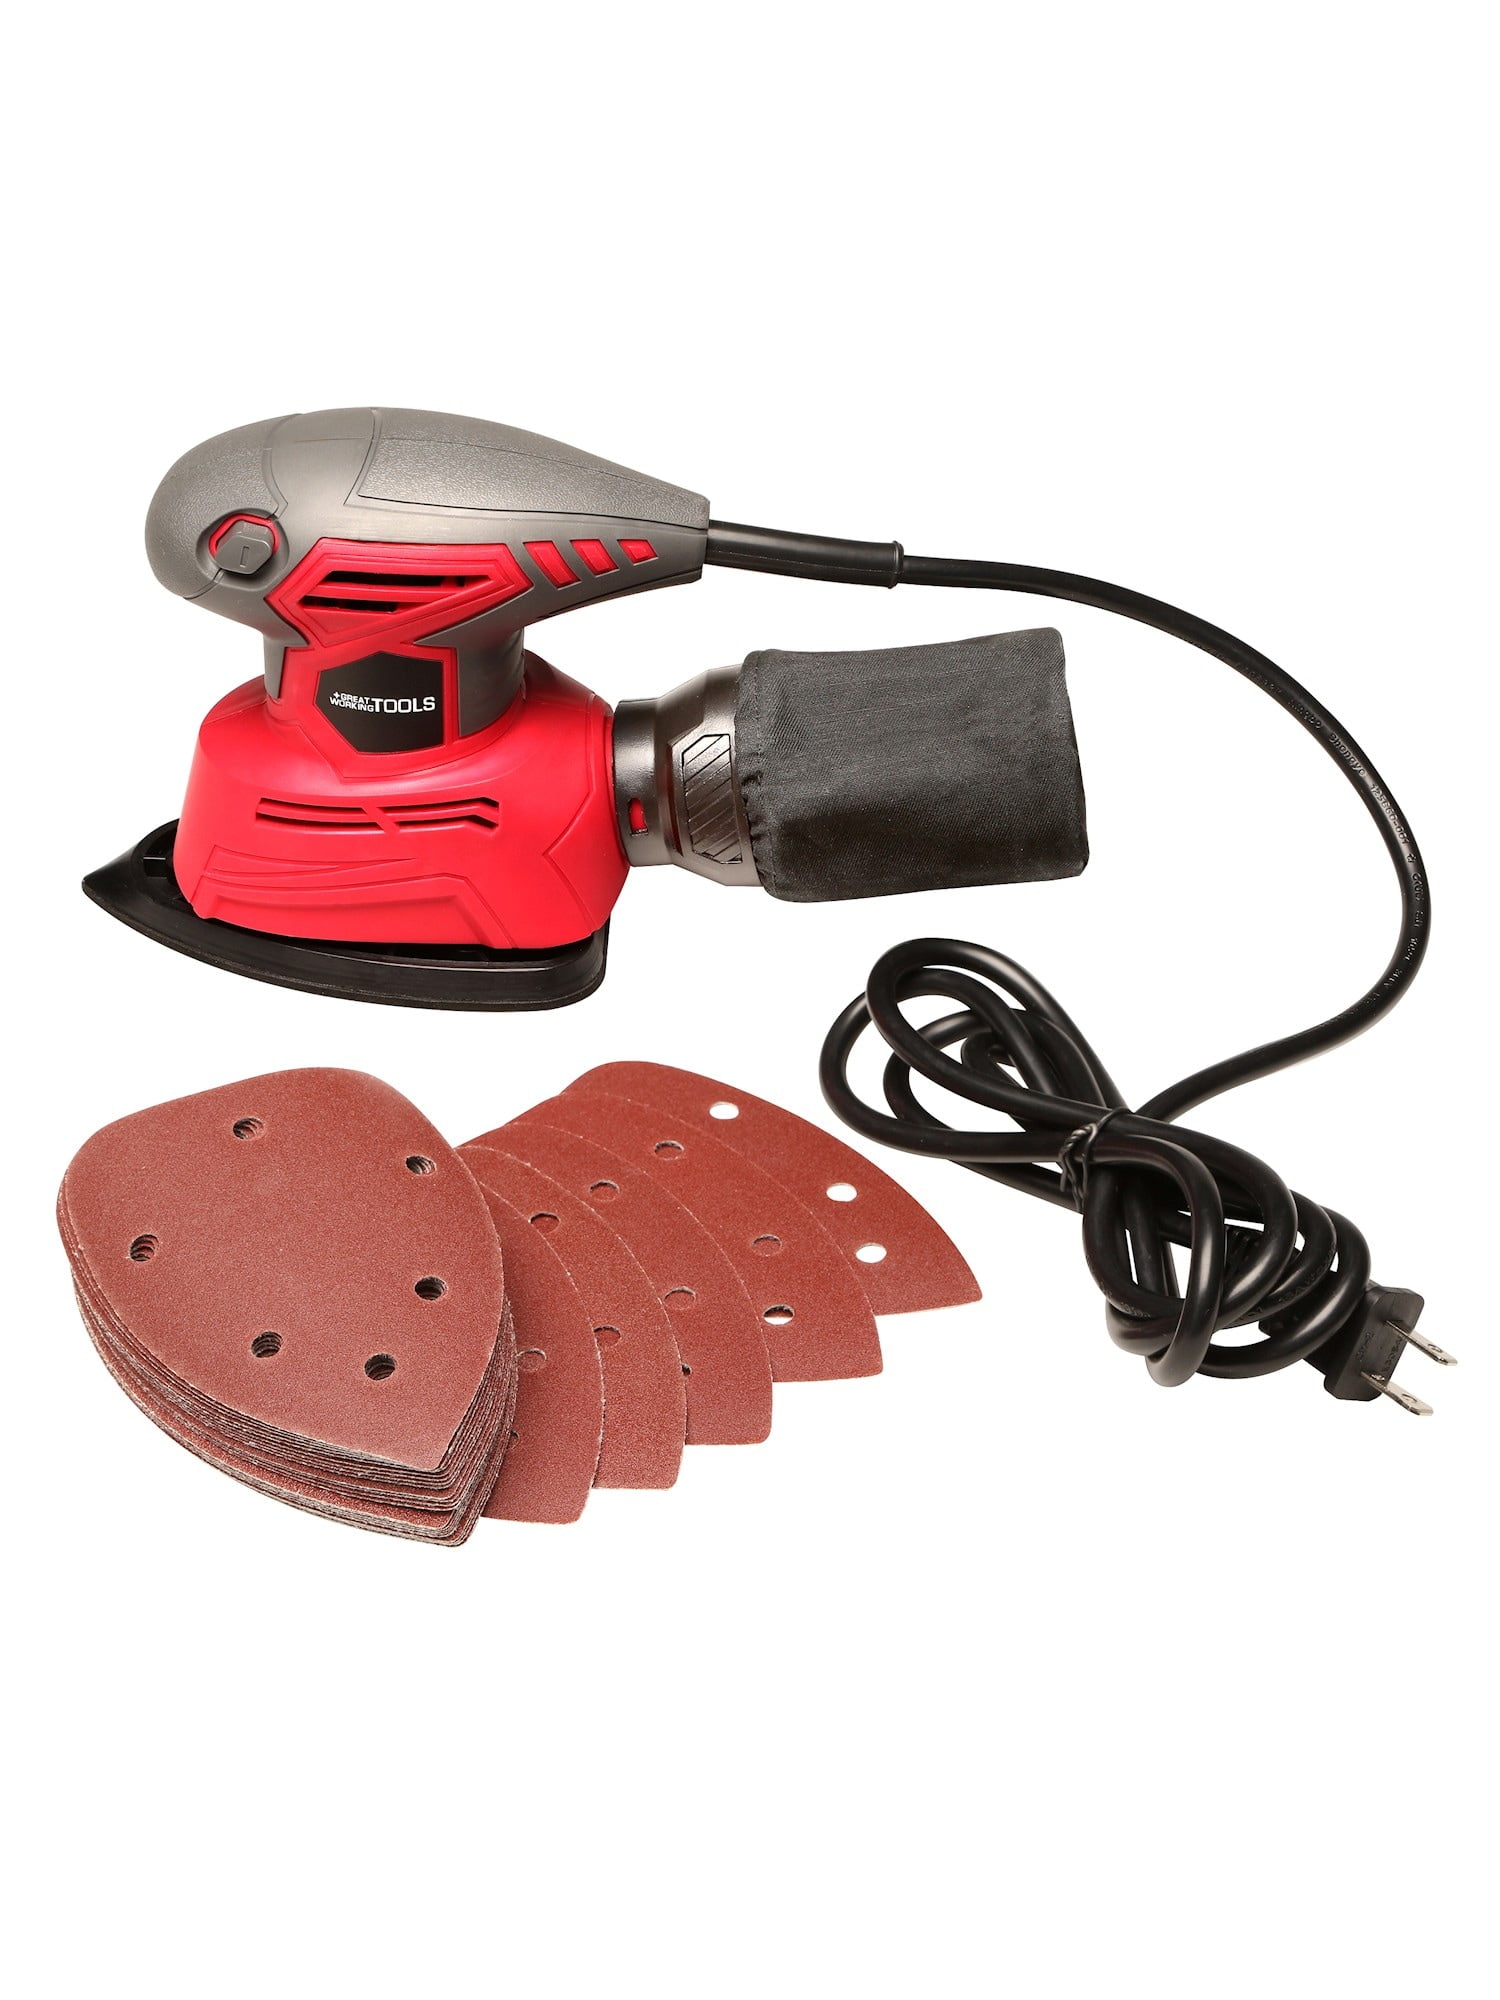 Great Working Tools Mouse Sander, Detail Orbital Palm Sander with Dust  Collection Bag & 27 pcs Sandpaper, 1.1 Amp 14,000 OPM